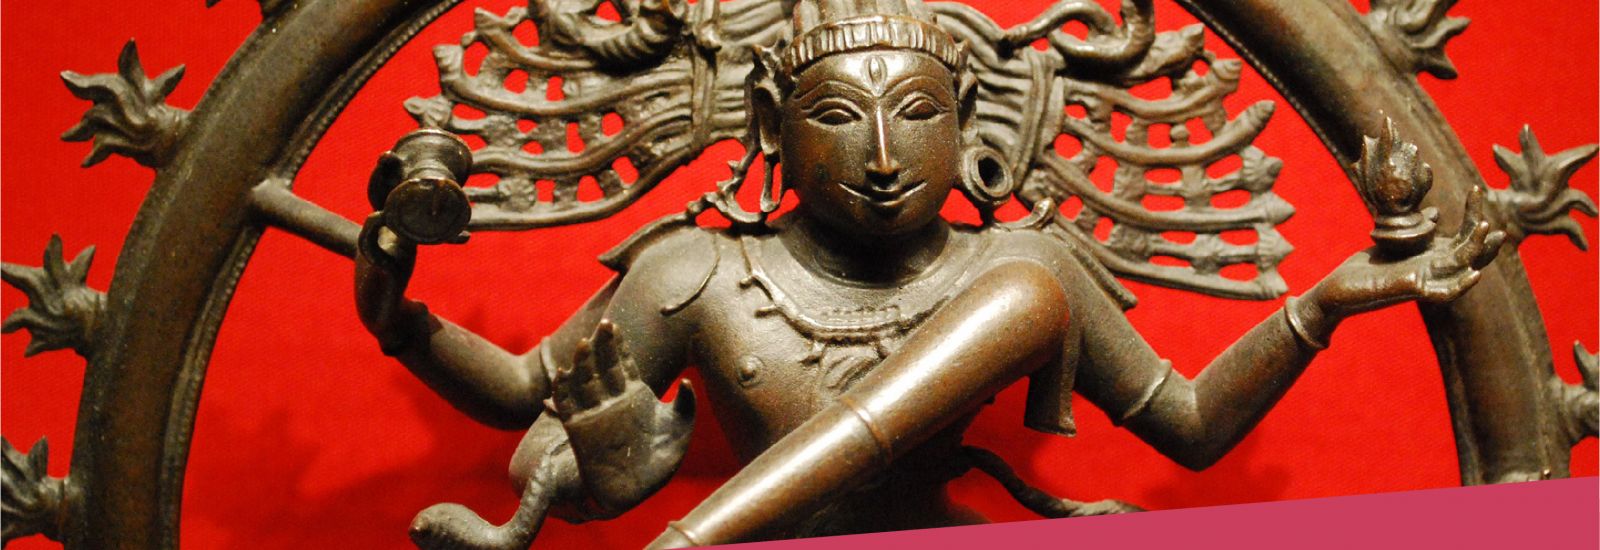 Detail of a statue of Shiva as Nataraja, Lord of the Dance, in the Ashmolean Museum